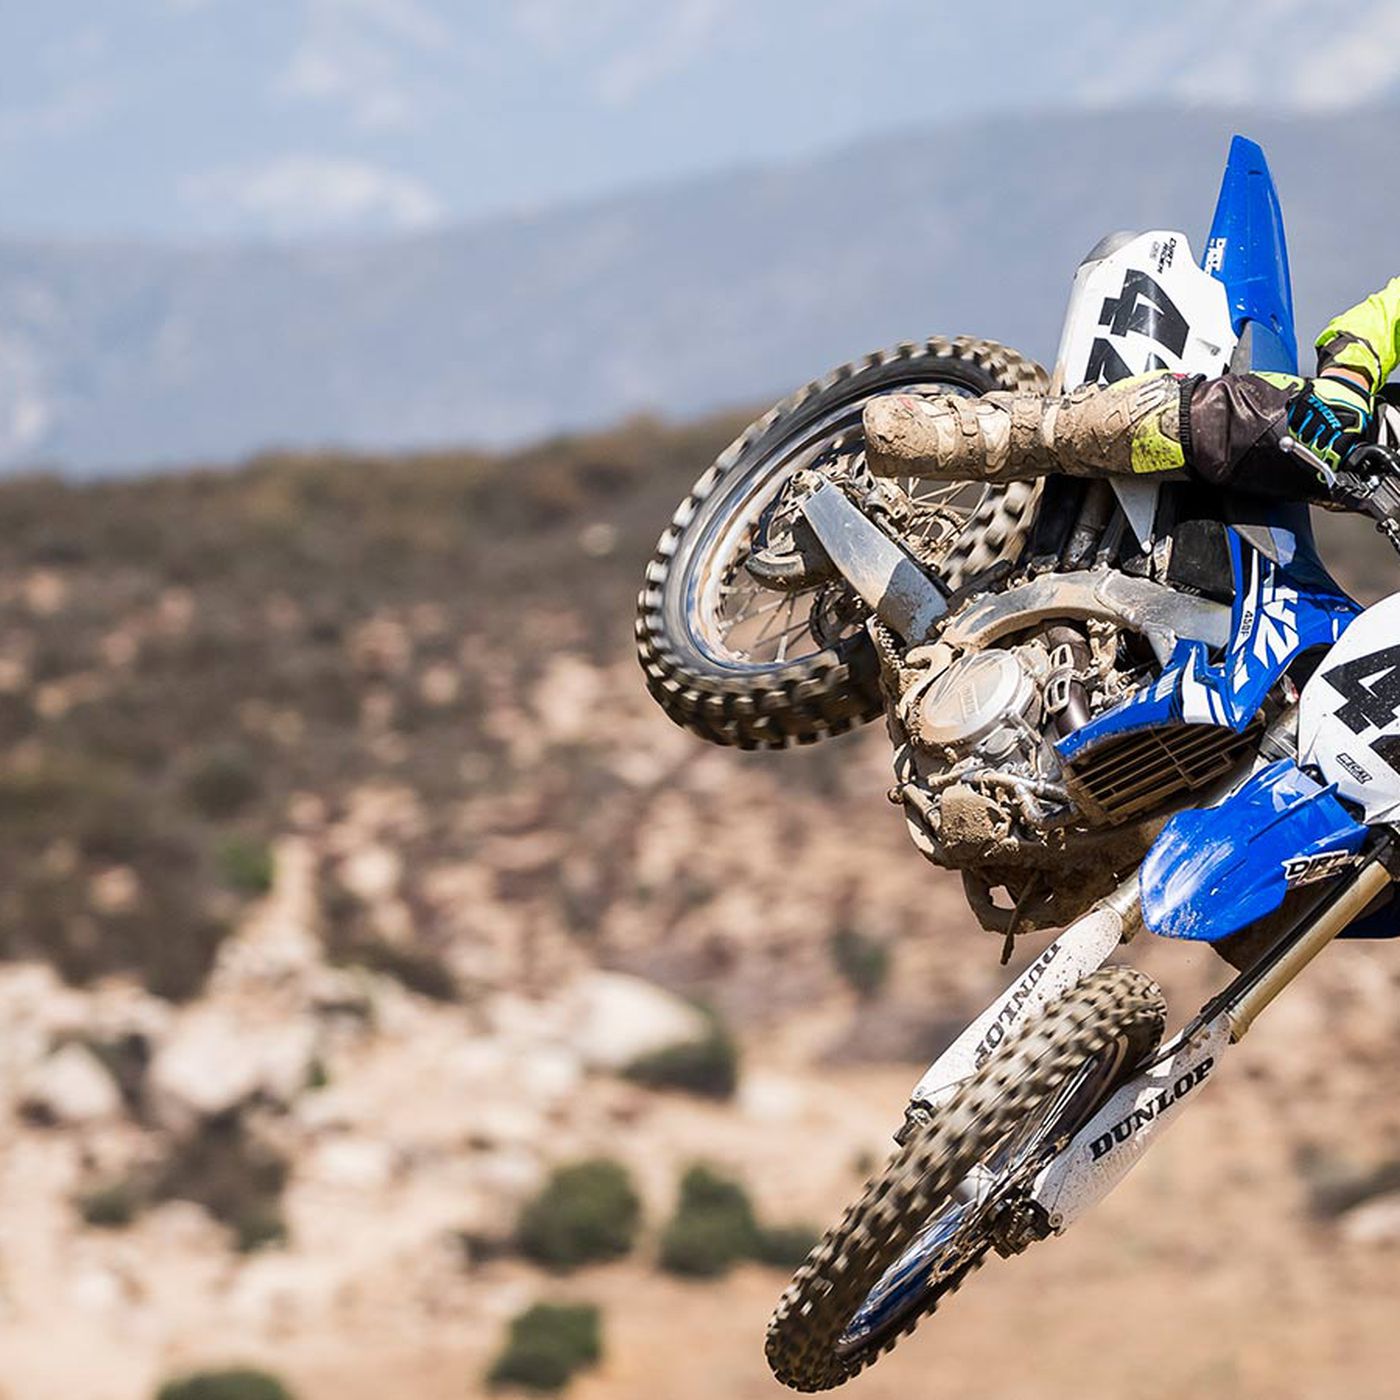 3rd Place of the 2018 450 MX Shootout: Yamaha YZ450F